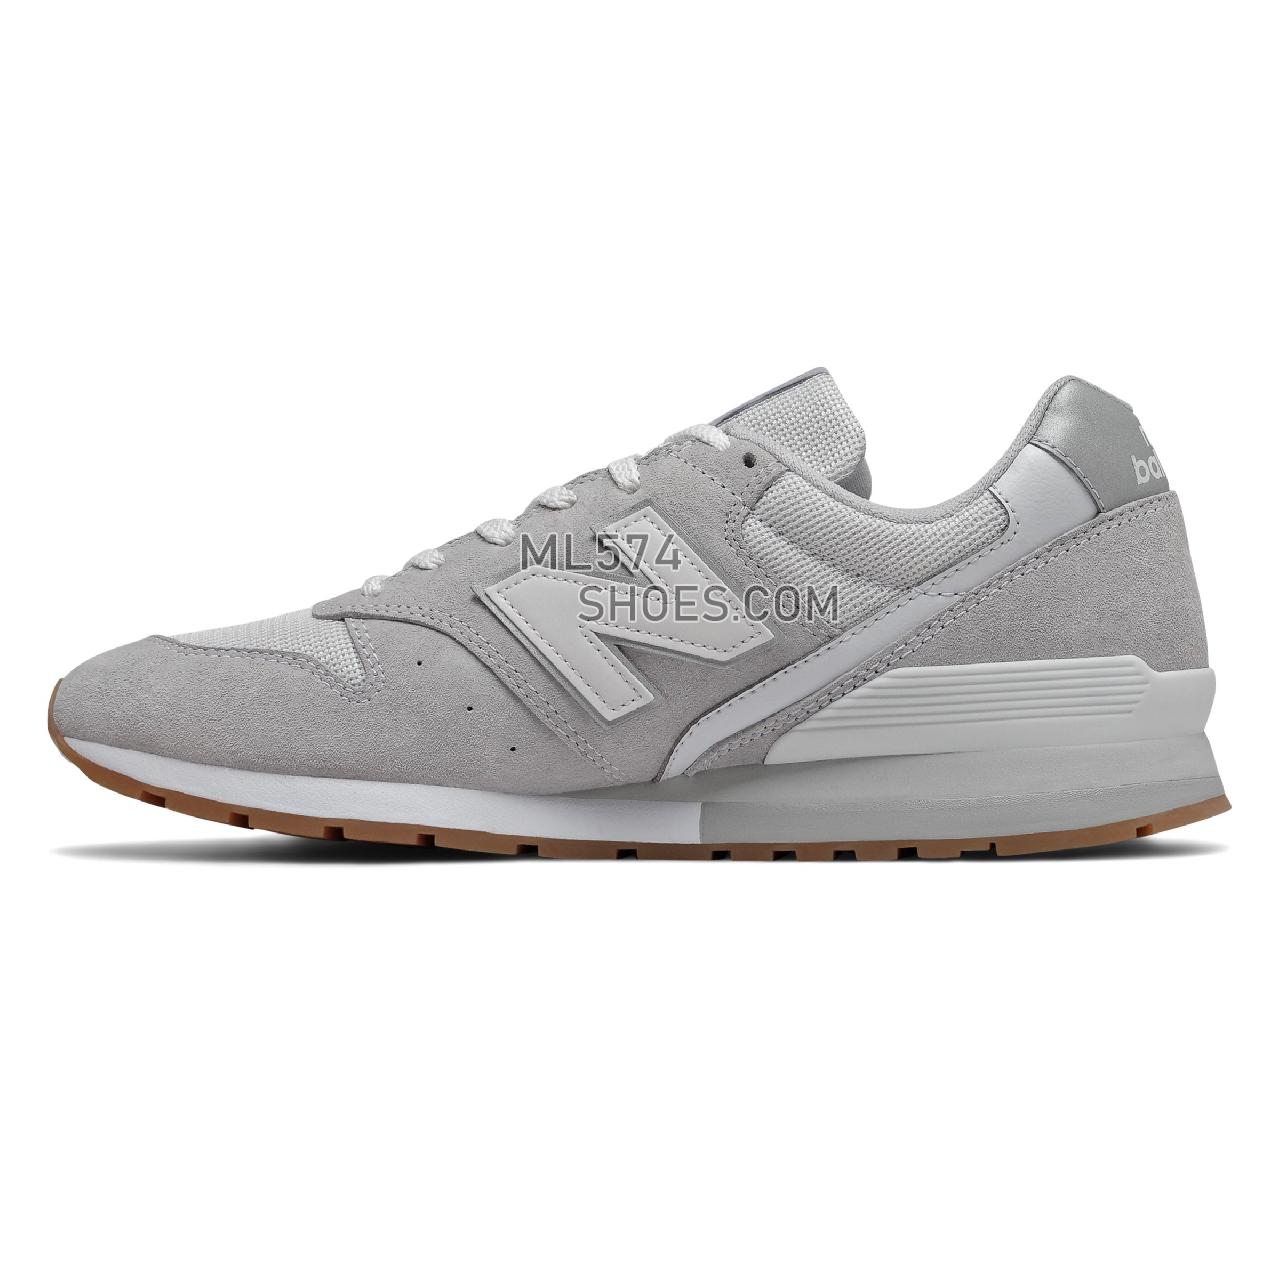 New Balance 996 - Men's Classic Sneakers - Rain Cloud with Munsell White - CM996SMG